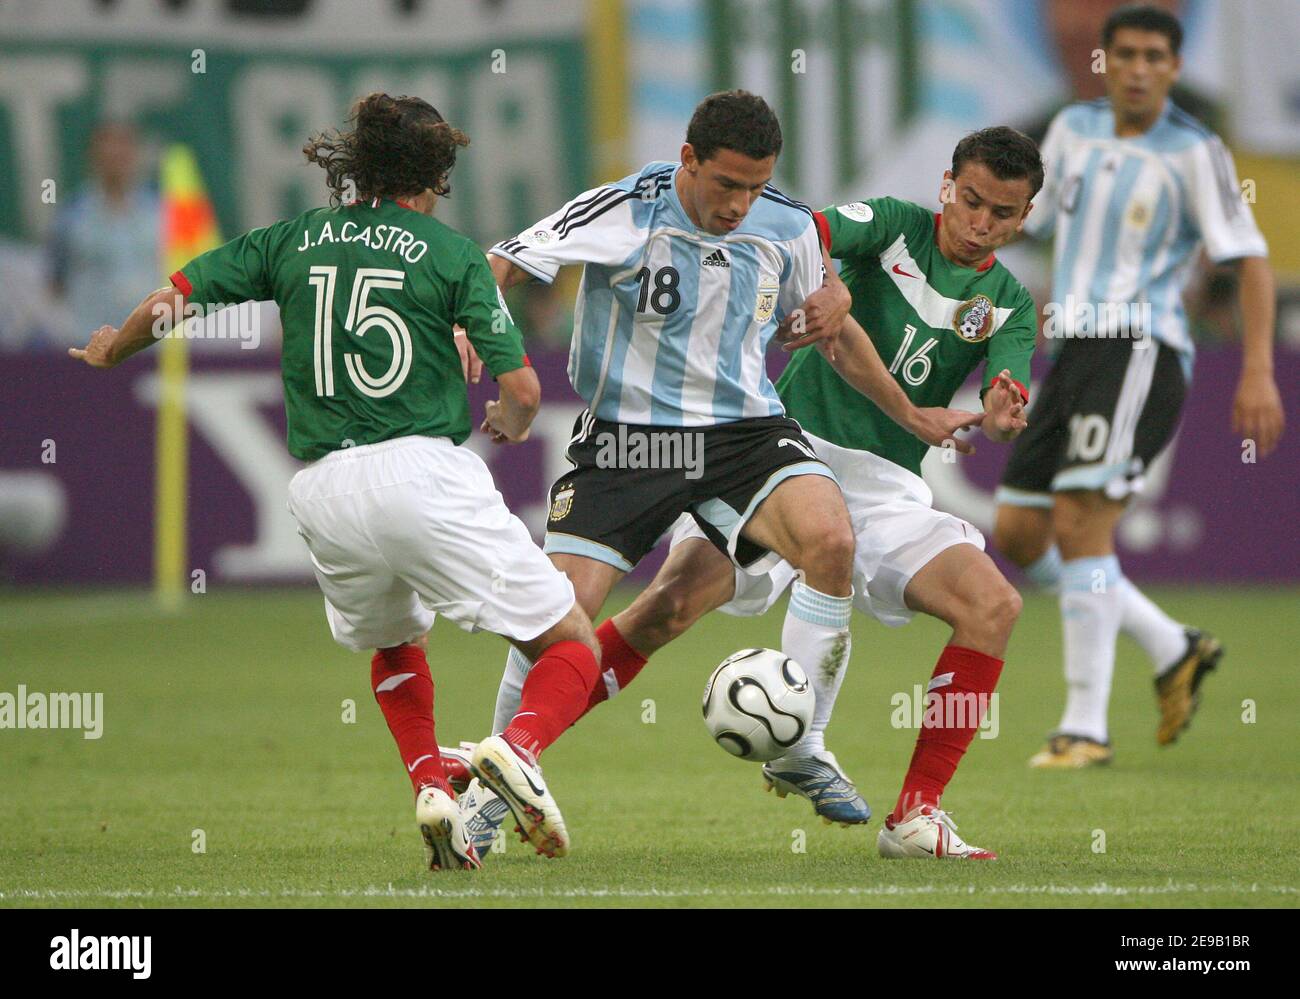 Argentina's Maxi Rodriguez during the World Cup 2006, Second round, Argentina vs Mexico at the Zentralstadion stadium in Leipzig, Germany on June 24, 2006. Argentina won 2-1. Photo by Gouhier-Hahn-Orban/Cameleon/ABACAPRESS.COM Stock Photo